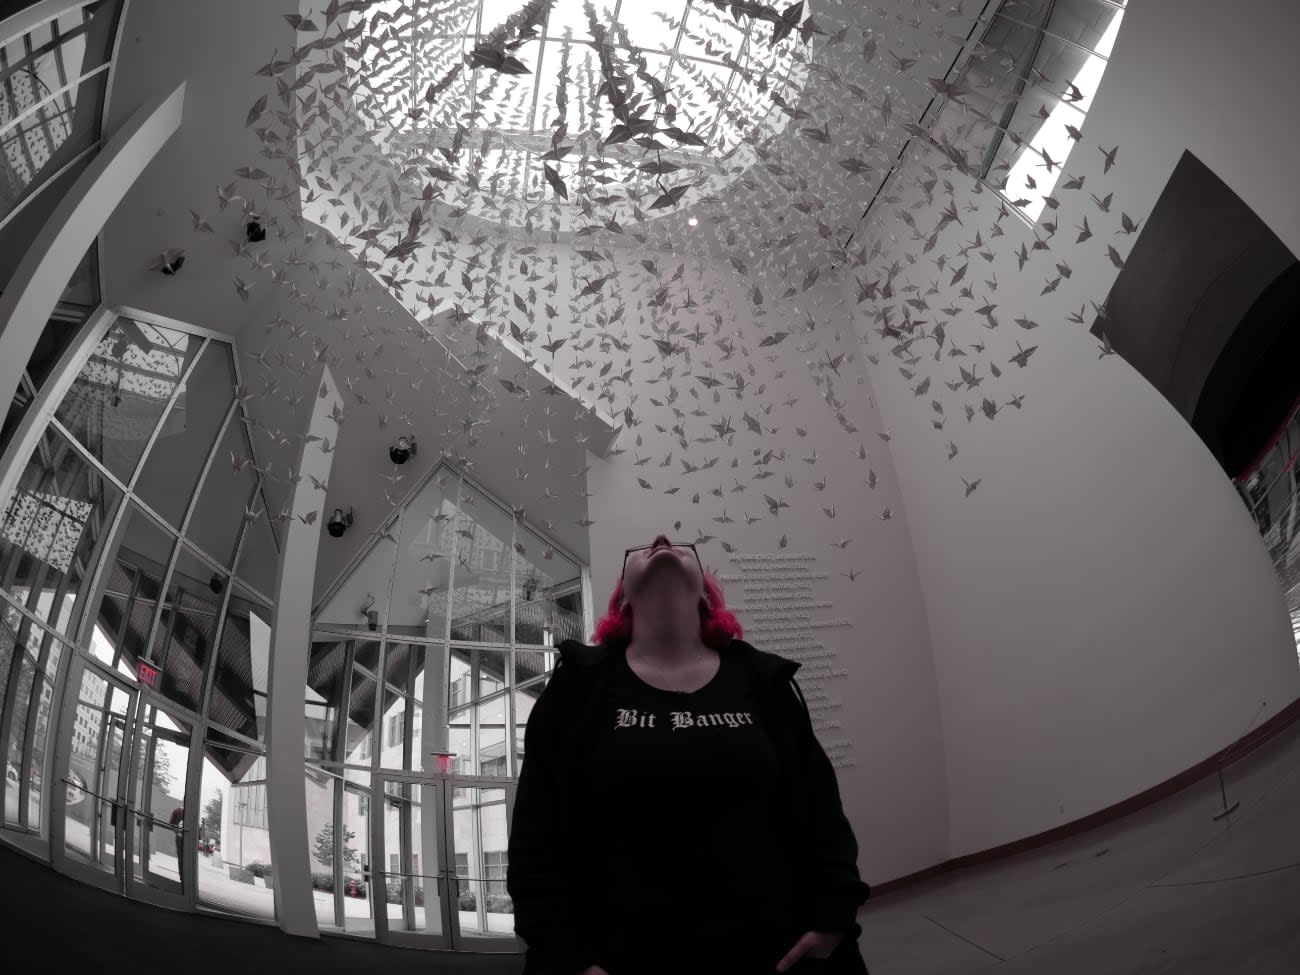 Photo of Limor Fried in a gallery wearing a shirt captioned Bit Banger and looking up towards a thousand hanging origami cranes.